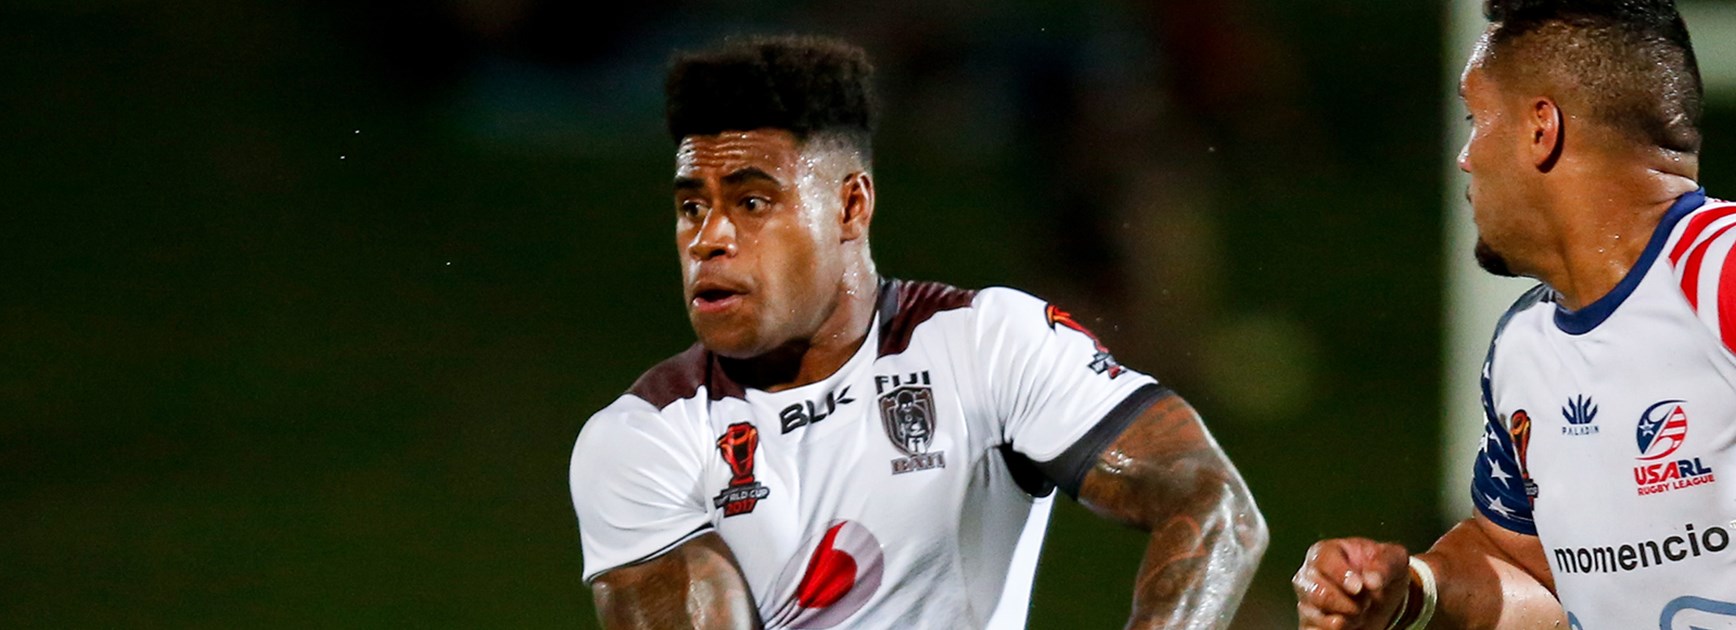 Fiji's Kevin Naiqama says rugby league is on the rise in Fiji, and World Cup success will help.